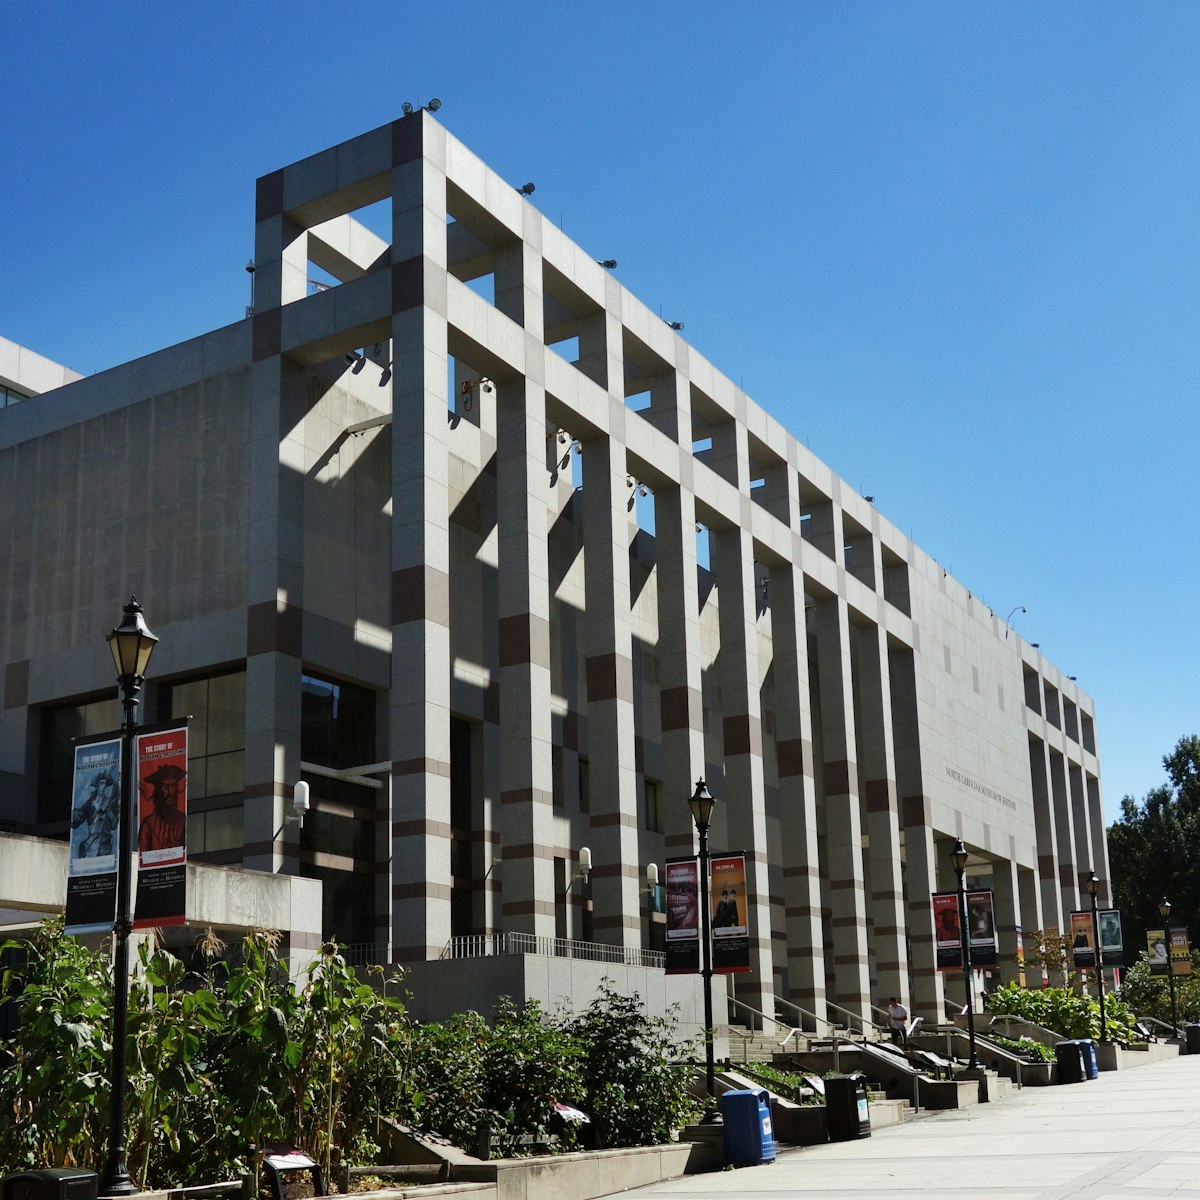 The North Carolina Museum of History in downtown Raleigh, North Carolina.